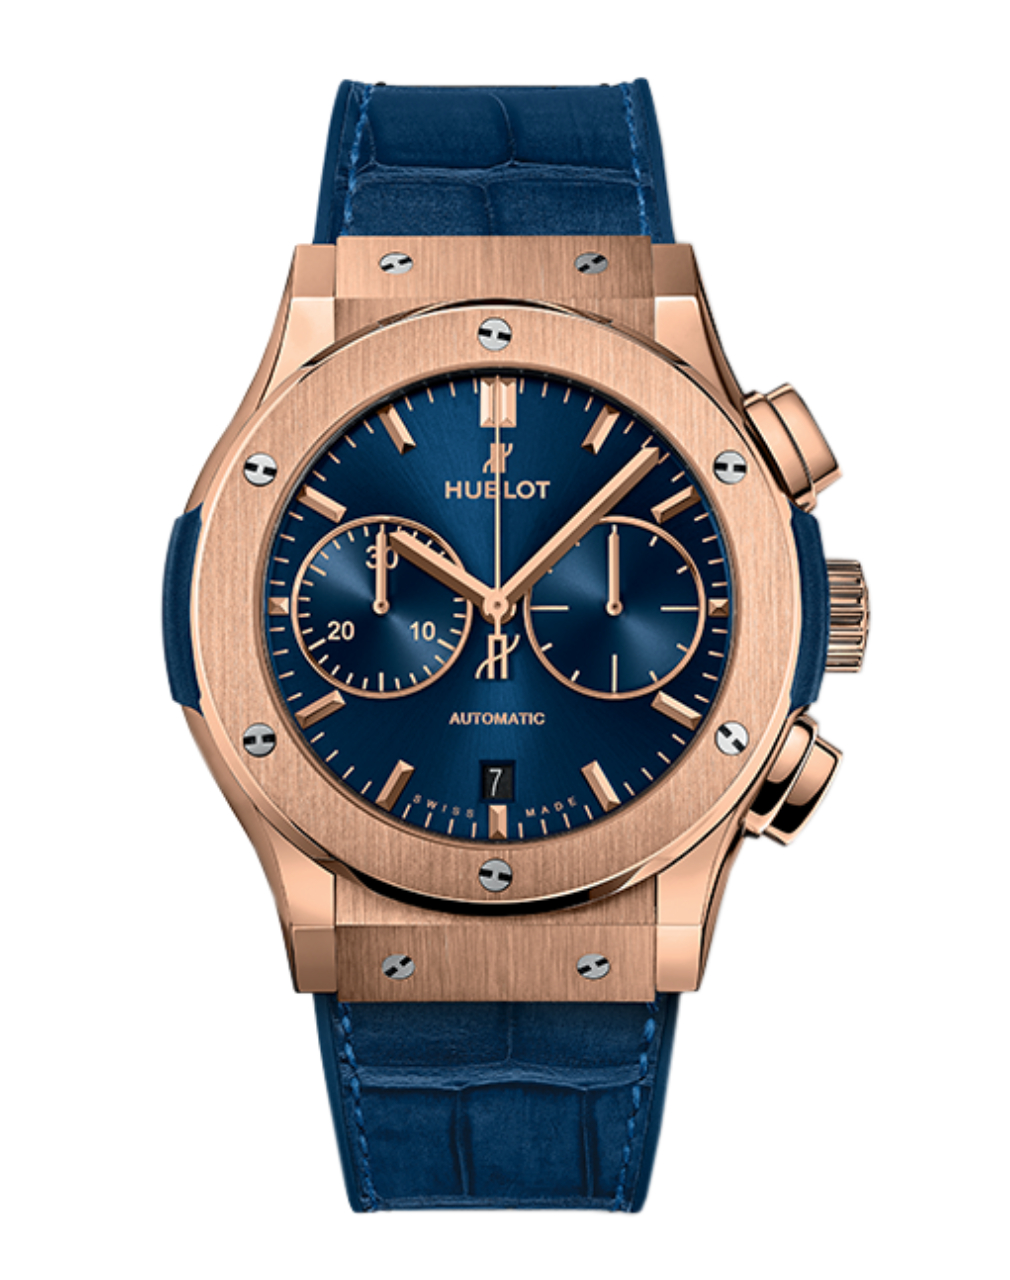 Classic Fusion Chronograph King Gold Blue 45mm 521.OX.7180.LR